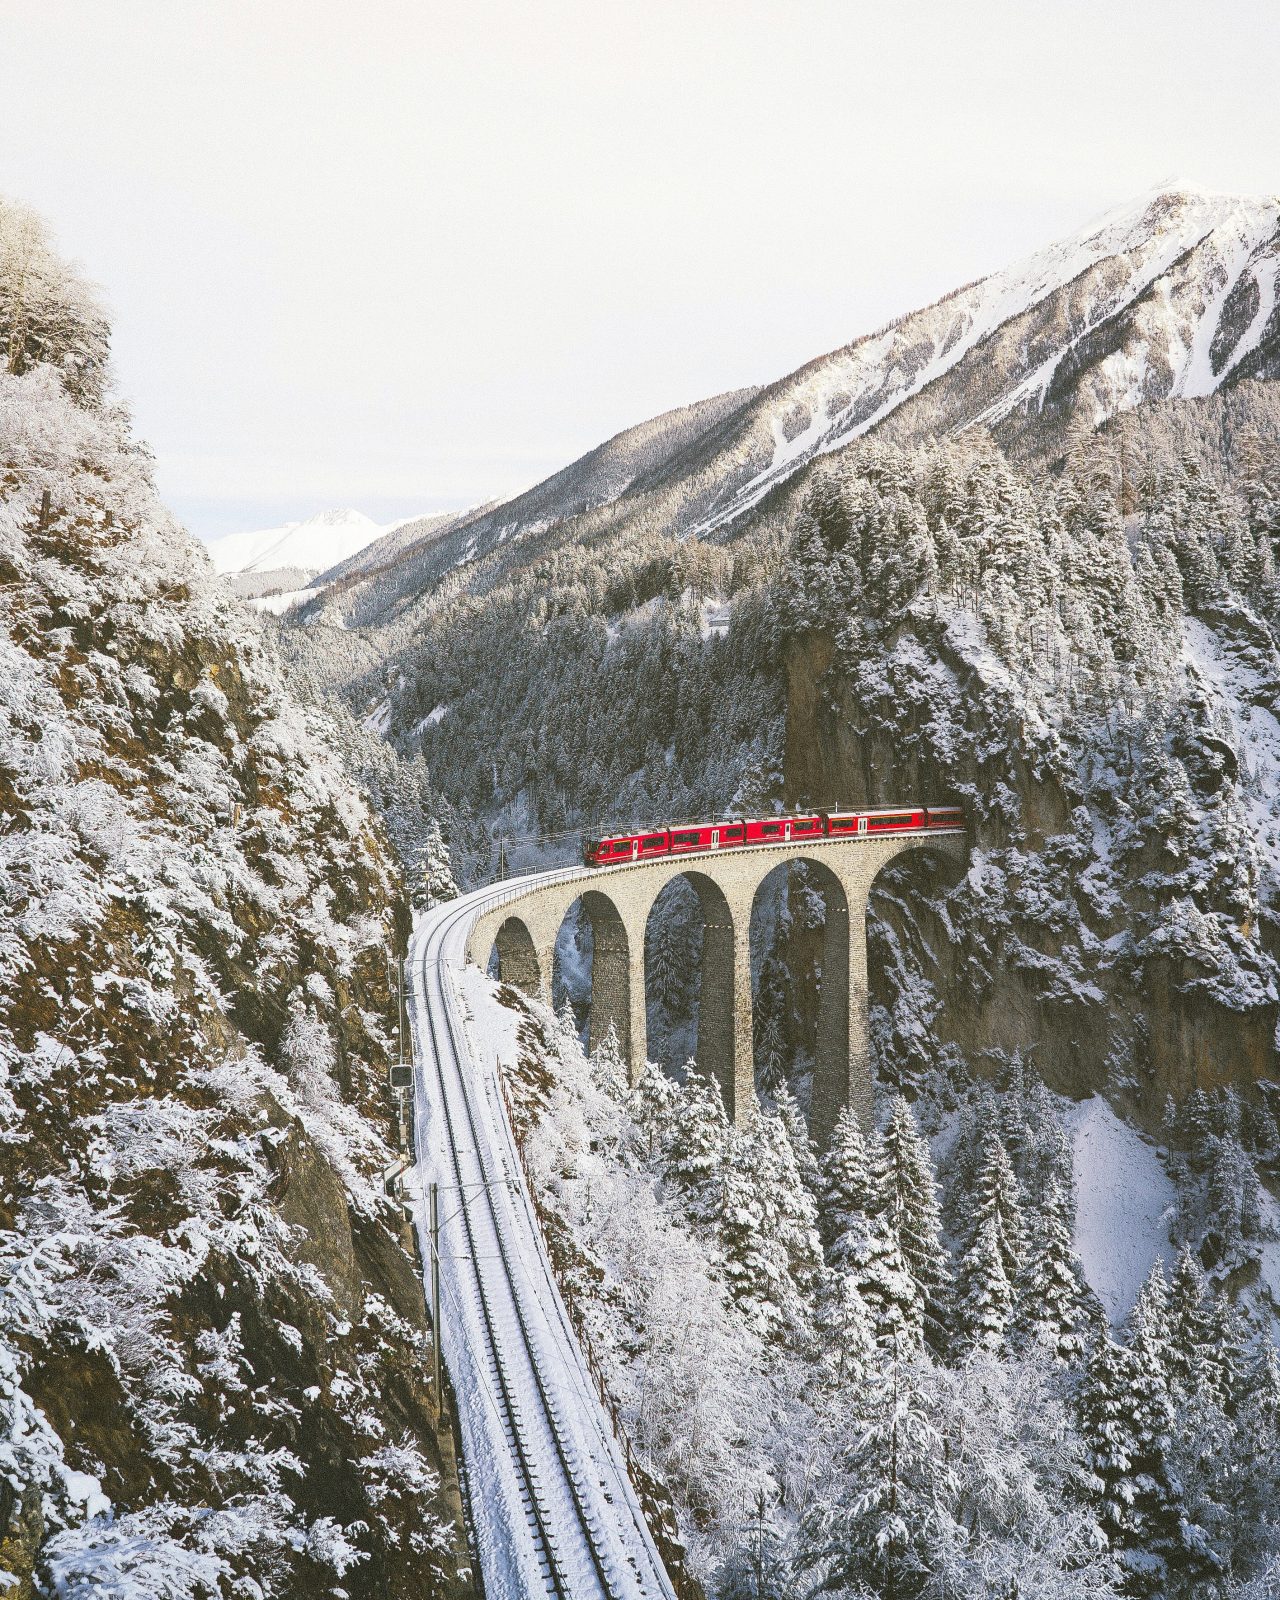 Snowy mountains in Switzerland with train